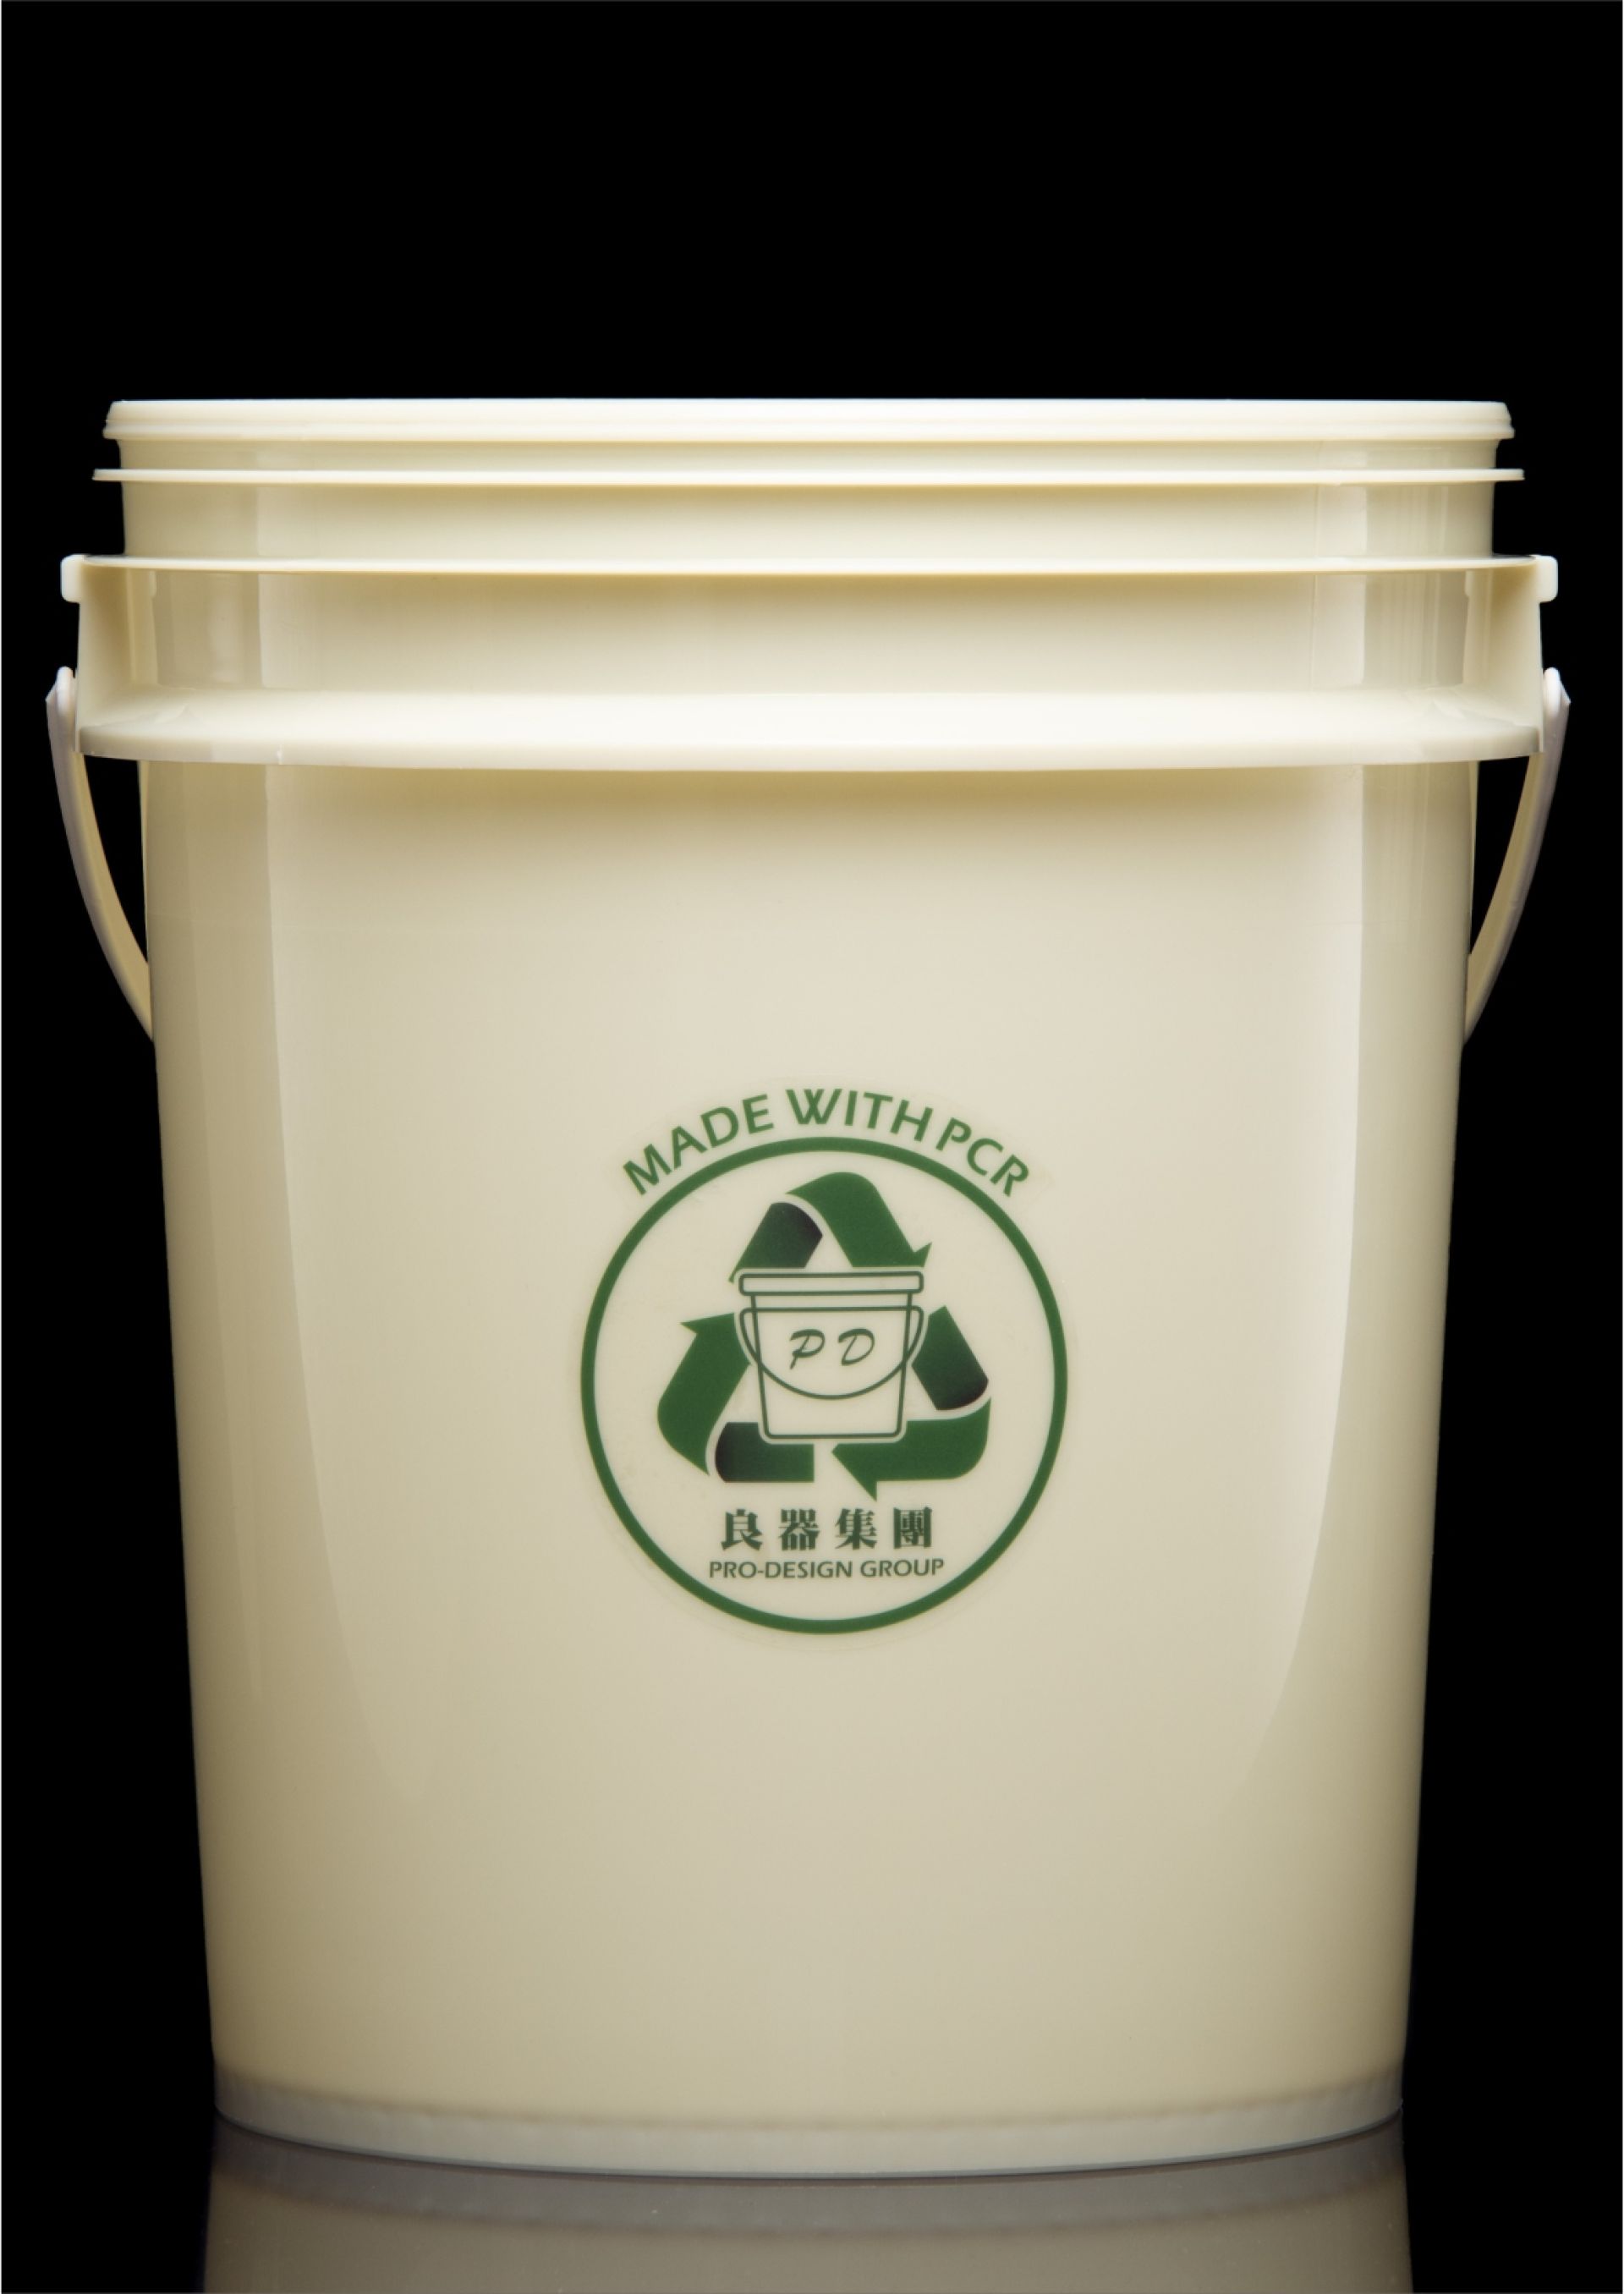 Newly released sustainable packaging - Post-Consumer Recycled Plastic Bucket/Pail